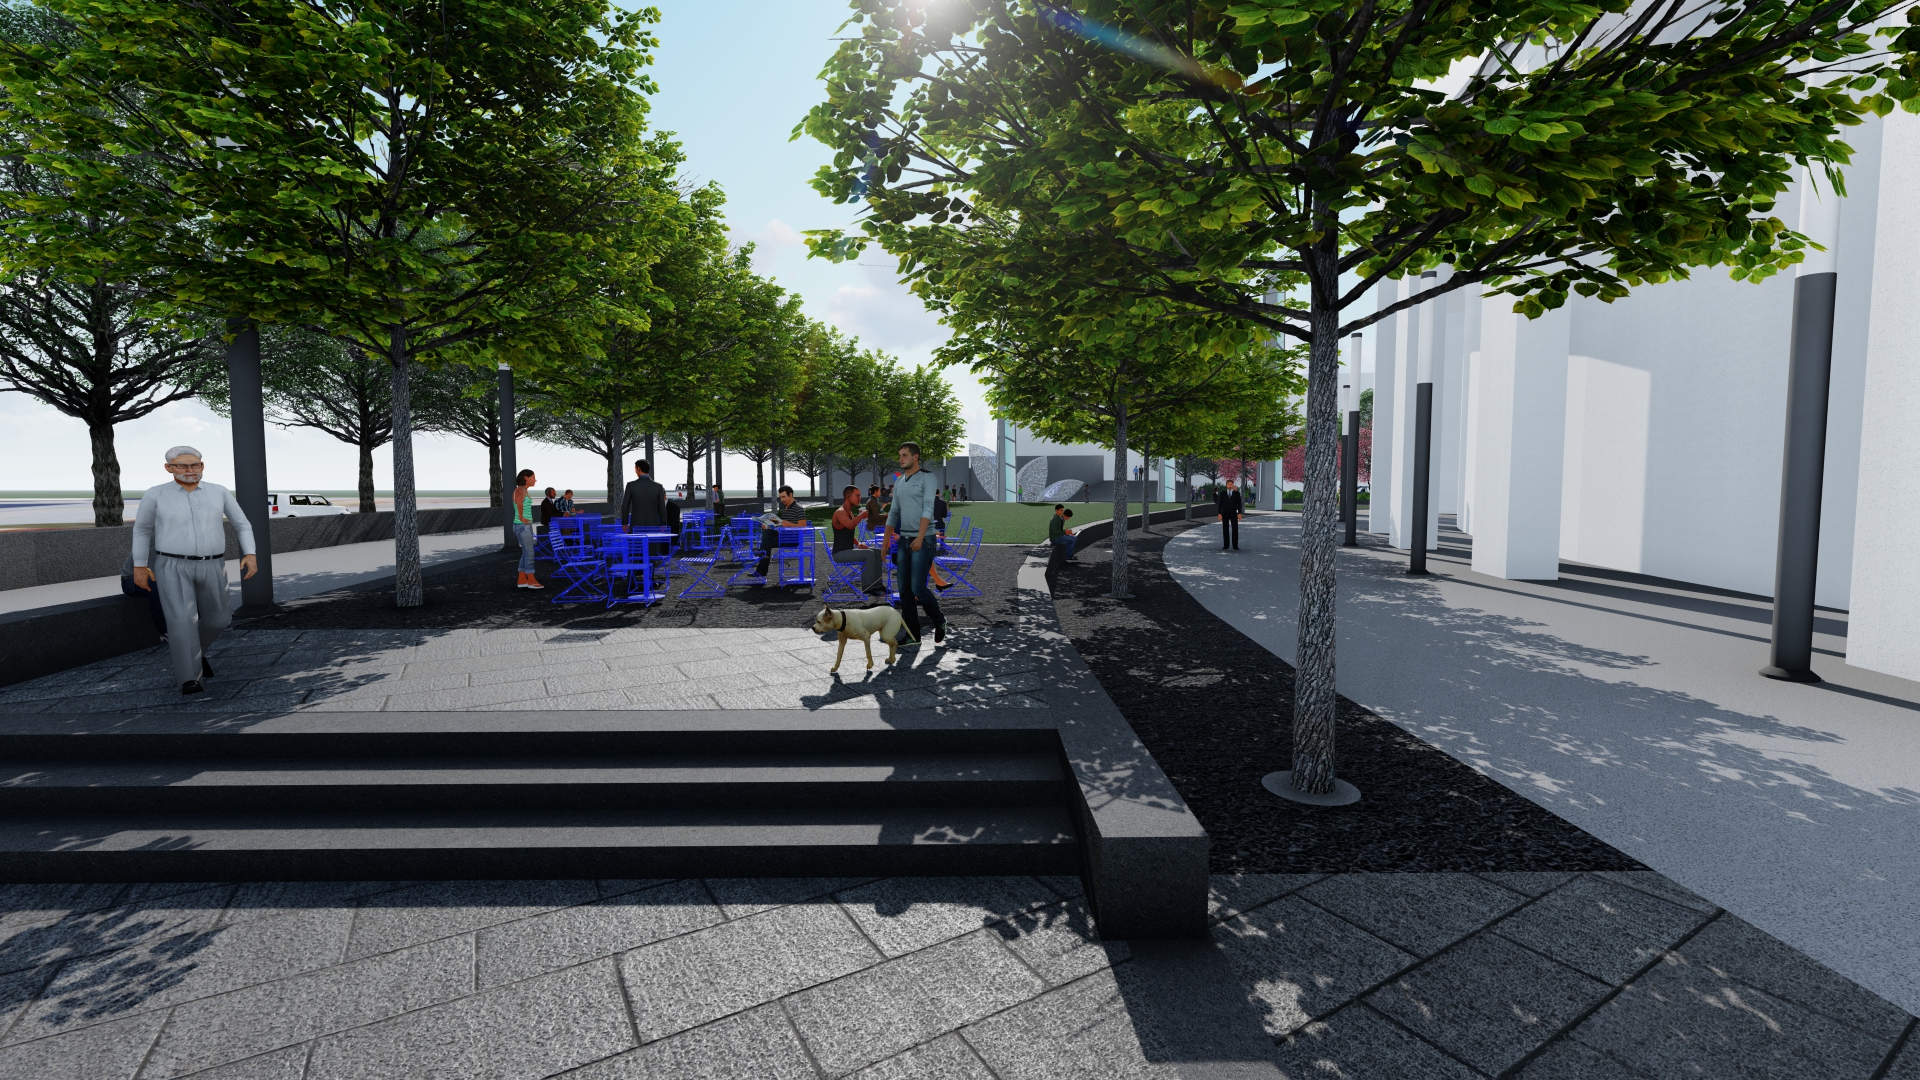 35 3D models for streets and parks ideas in 2023